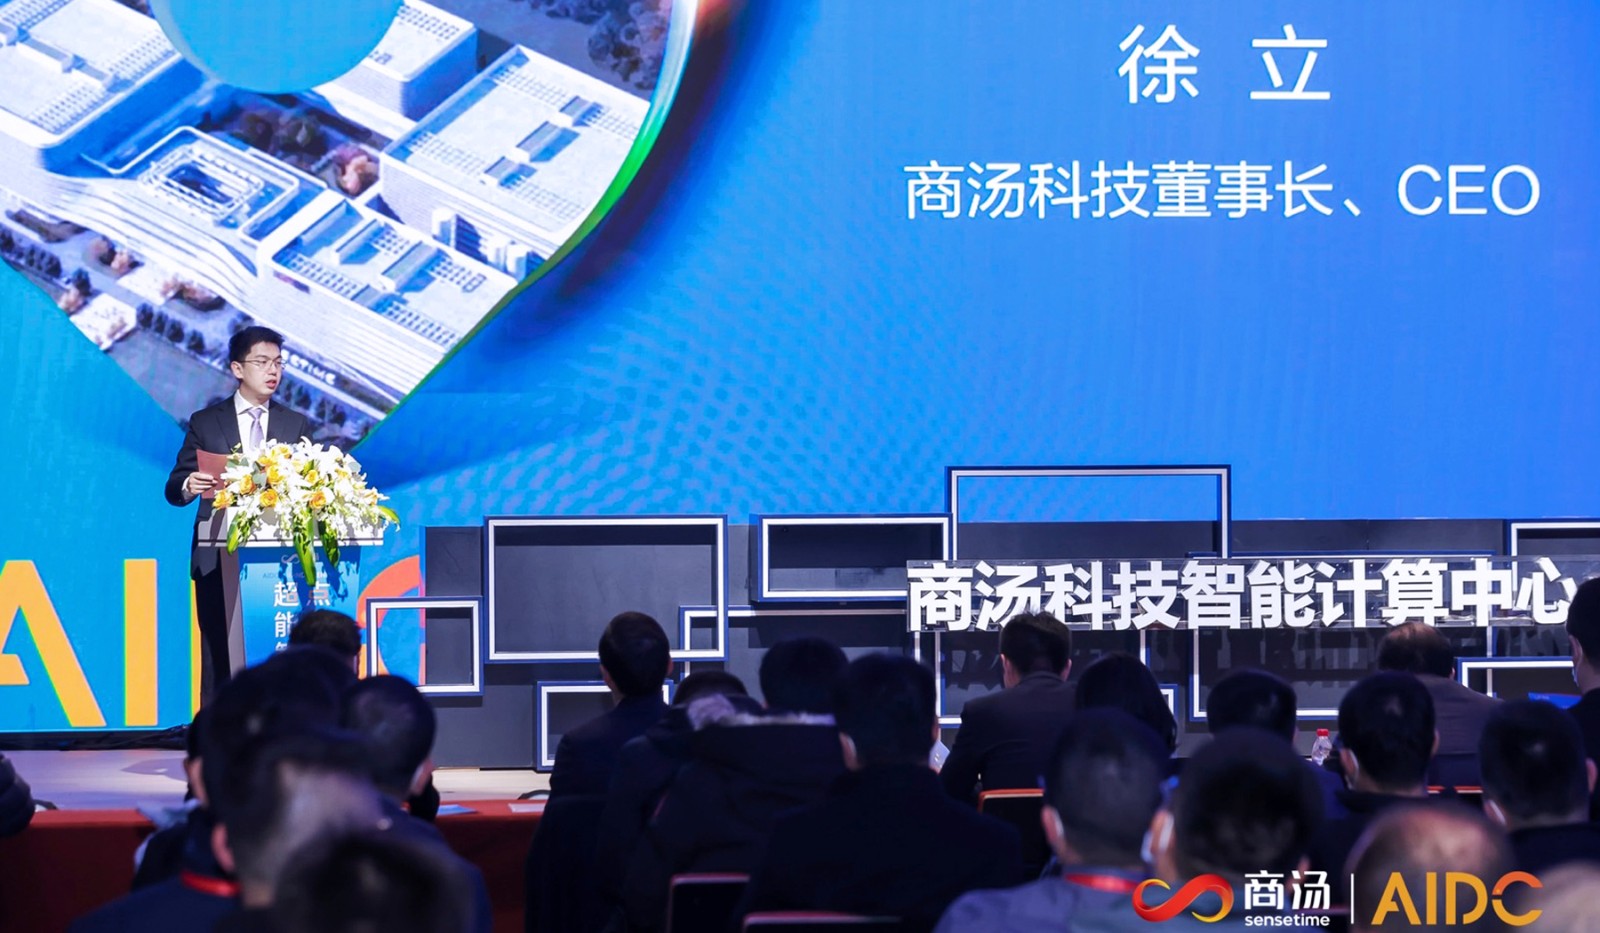 Dr. Xu Li, co-founder and CEO of SenseTime at the opening ceremony of AIDC.jpg